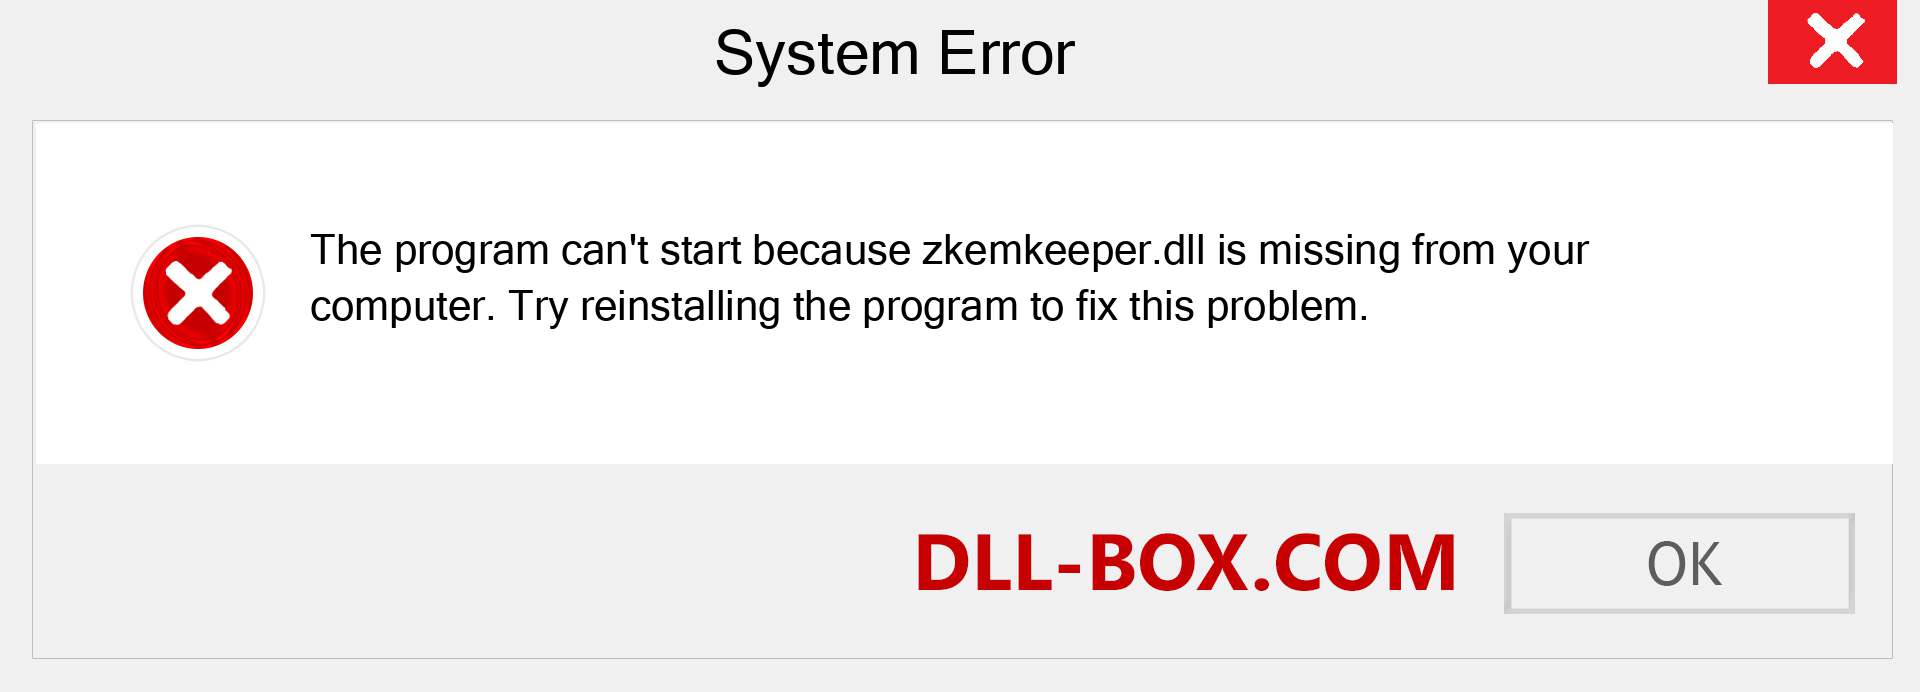  zkemkeeper.dll file is missing?. Download for Windows 7, 8, 10 - Fix  zkemkeeper dll Missing Error on Windows, photos, images